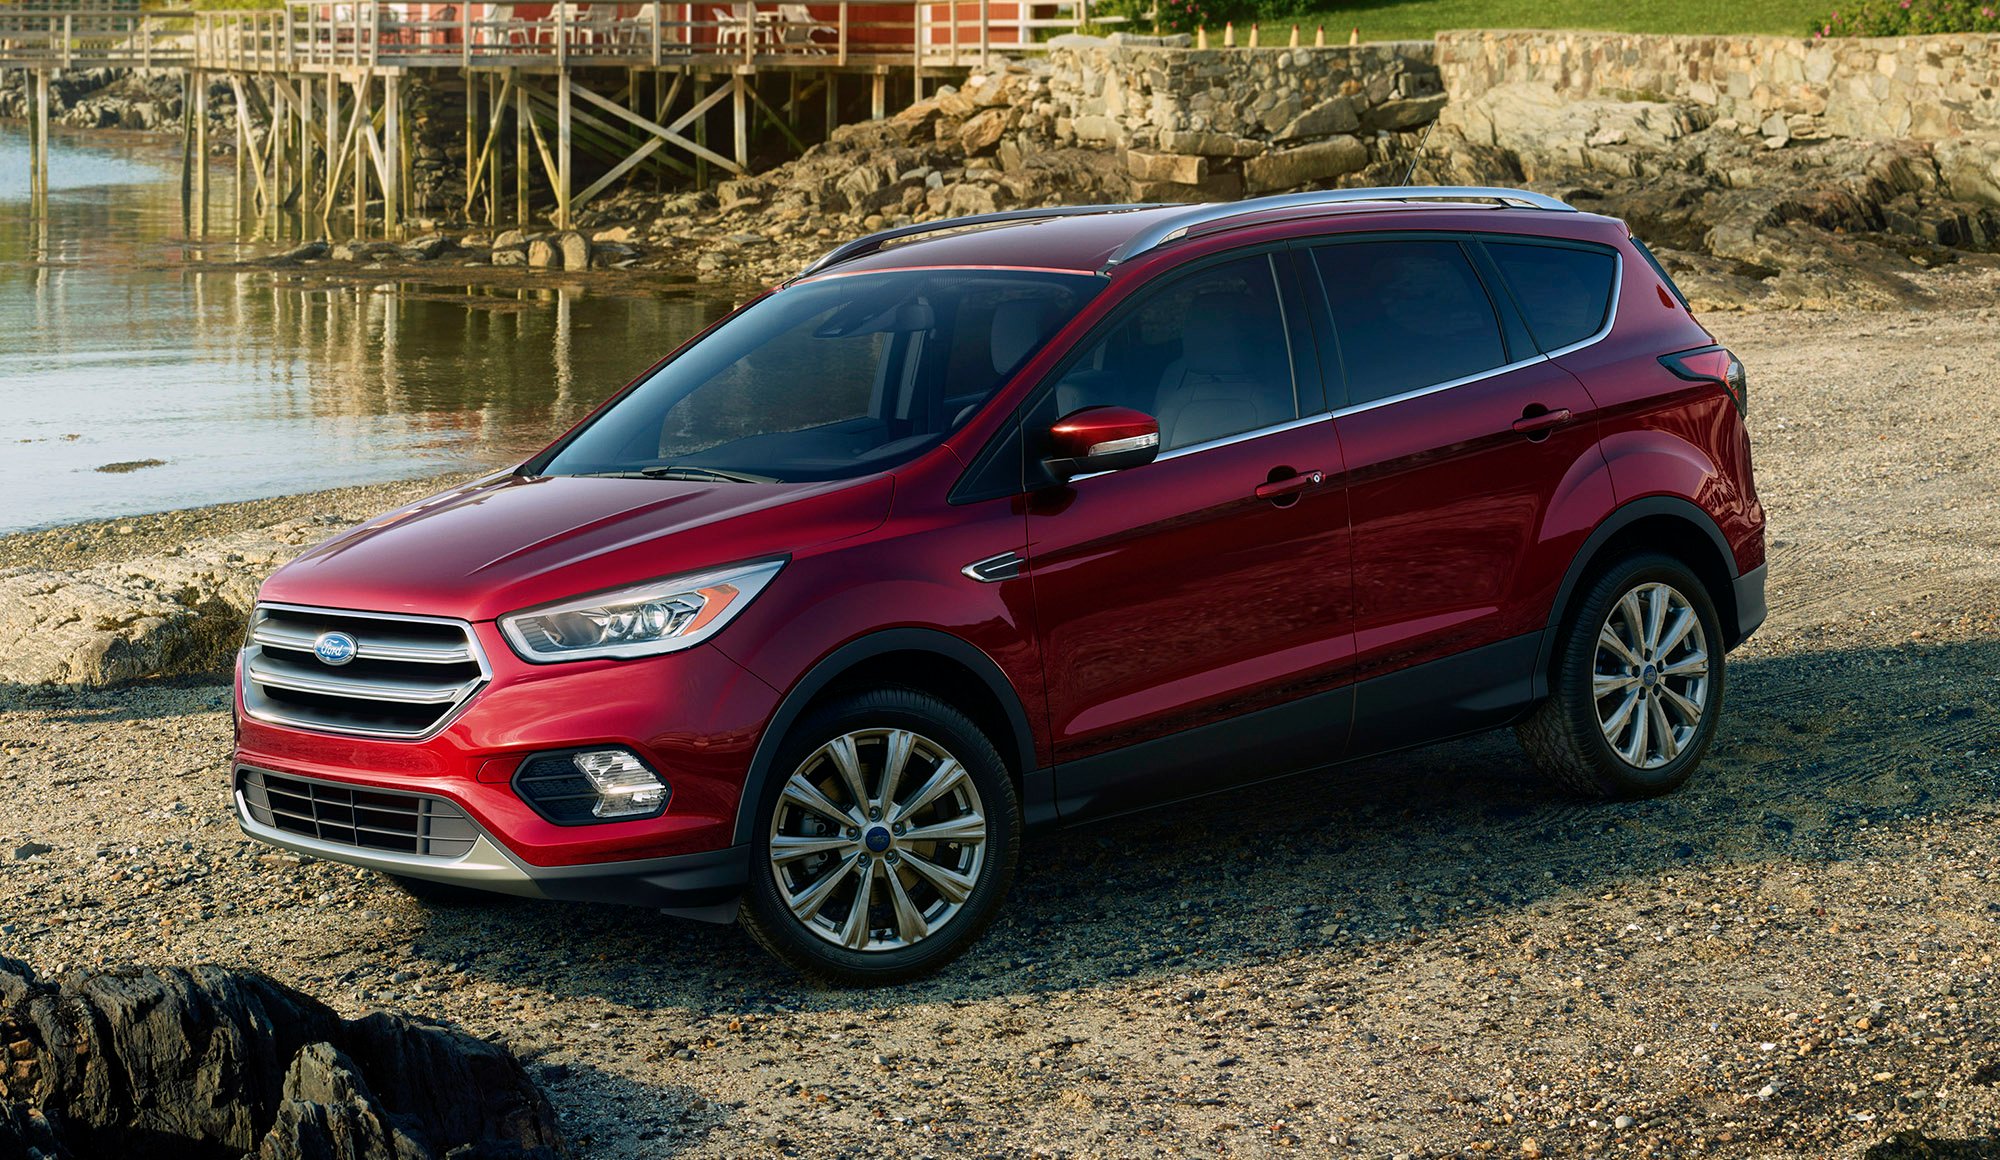 2017 Ford Kuga revealed as facelifted Escape: New looks ... 2006 ranger fuse box 